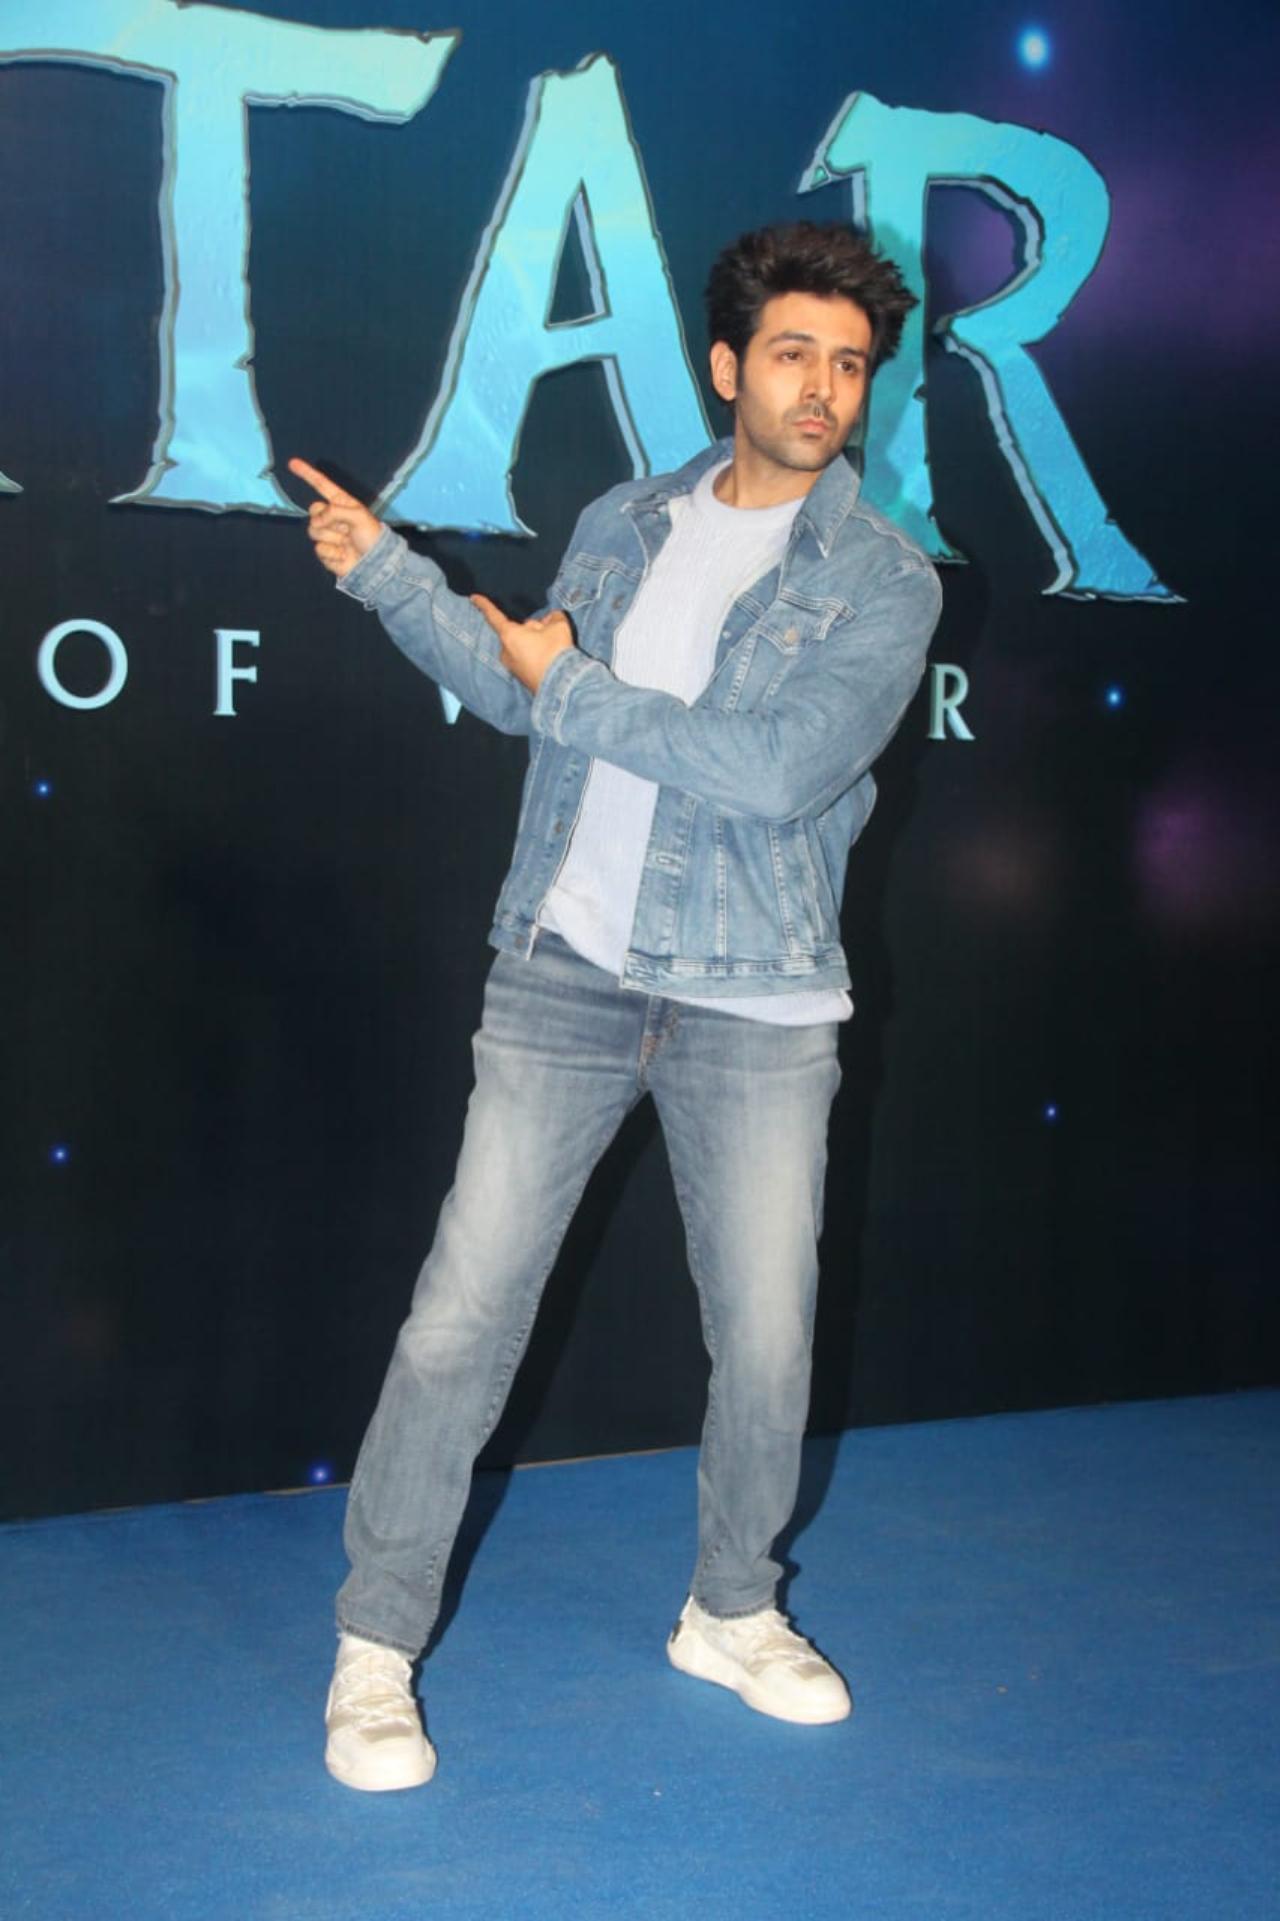 Kartik Aaryan who is basking in the success of his films Bhool Bhulaiyaa 2 and Freddy was seen at the screening of the film. Dressed in an all denim outfit, the actor happily posed for the paparazzi